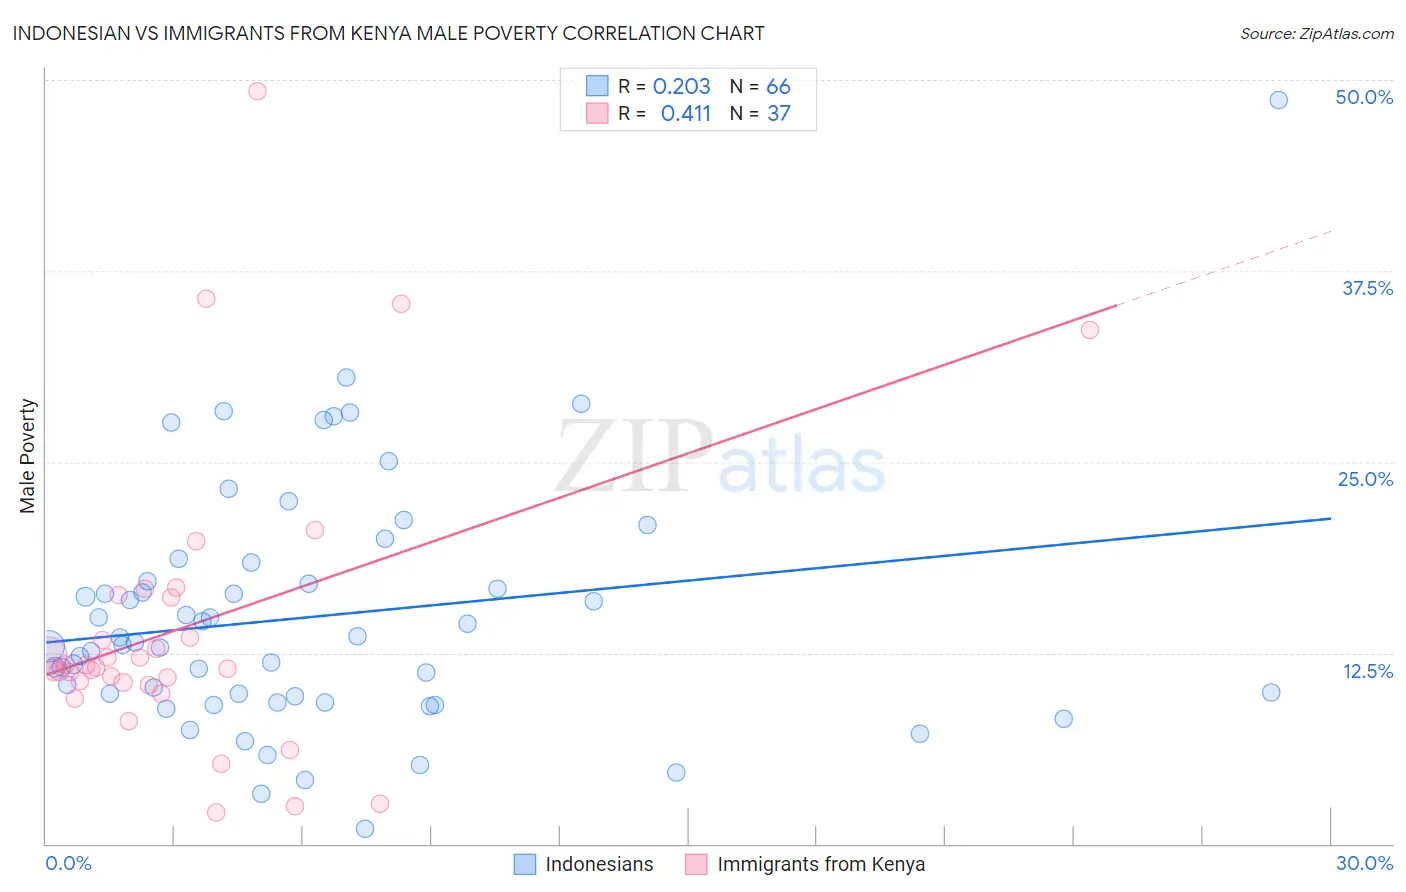 Indonesian vs Immigrants from Kenya Male Poverty